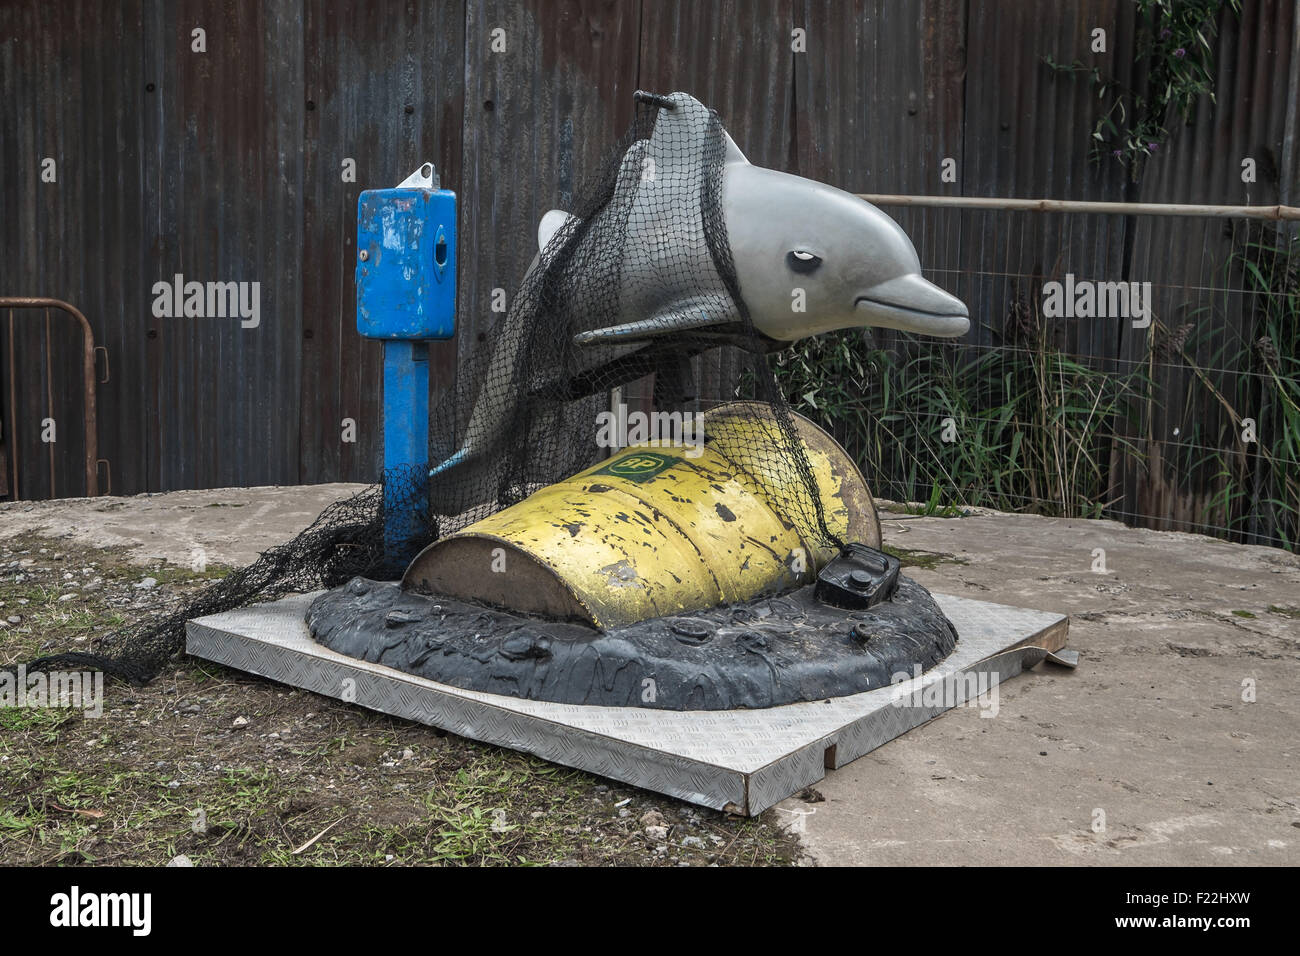 WESTON-SUPER-MARE, UK - SEPTEMBER 3 2015: Reconditioned dolphin ride with a crude oil drum and a tuna net at Banksy's Dismaland. Stock Photo